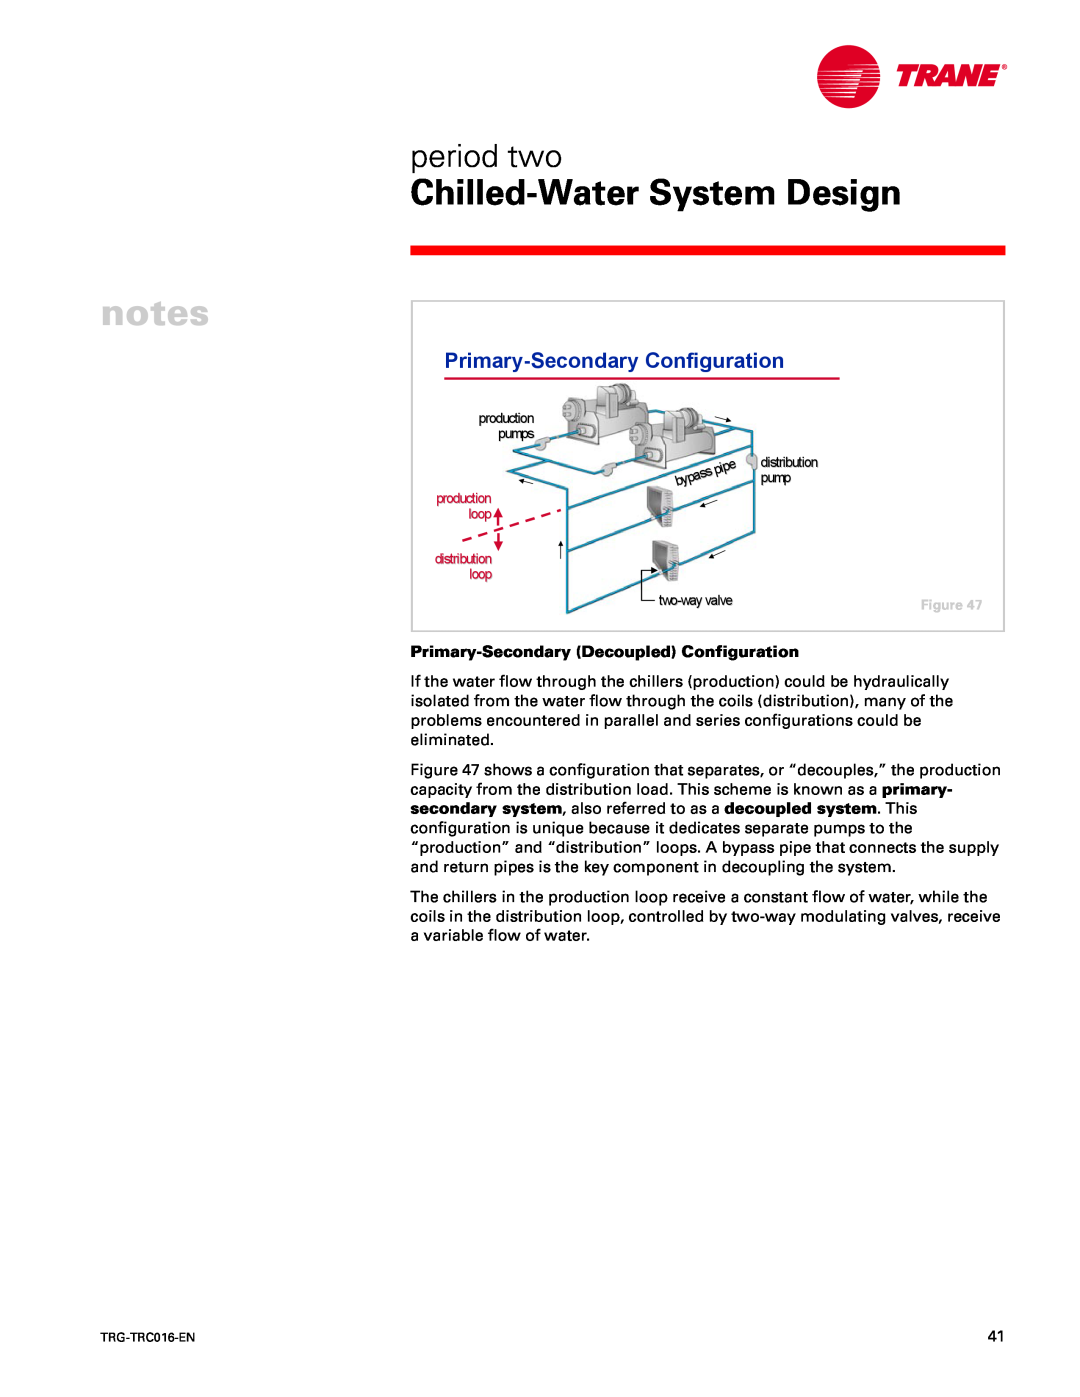 Trane TRG-TRC016-EN manual Primary-SecondaryConfiguration, Chilled-WaterSystem Design, period two 